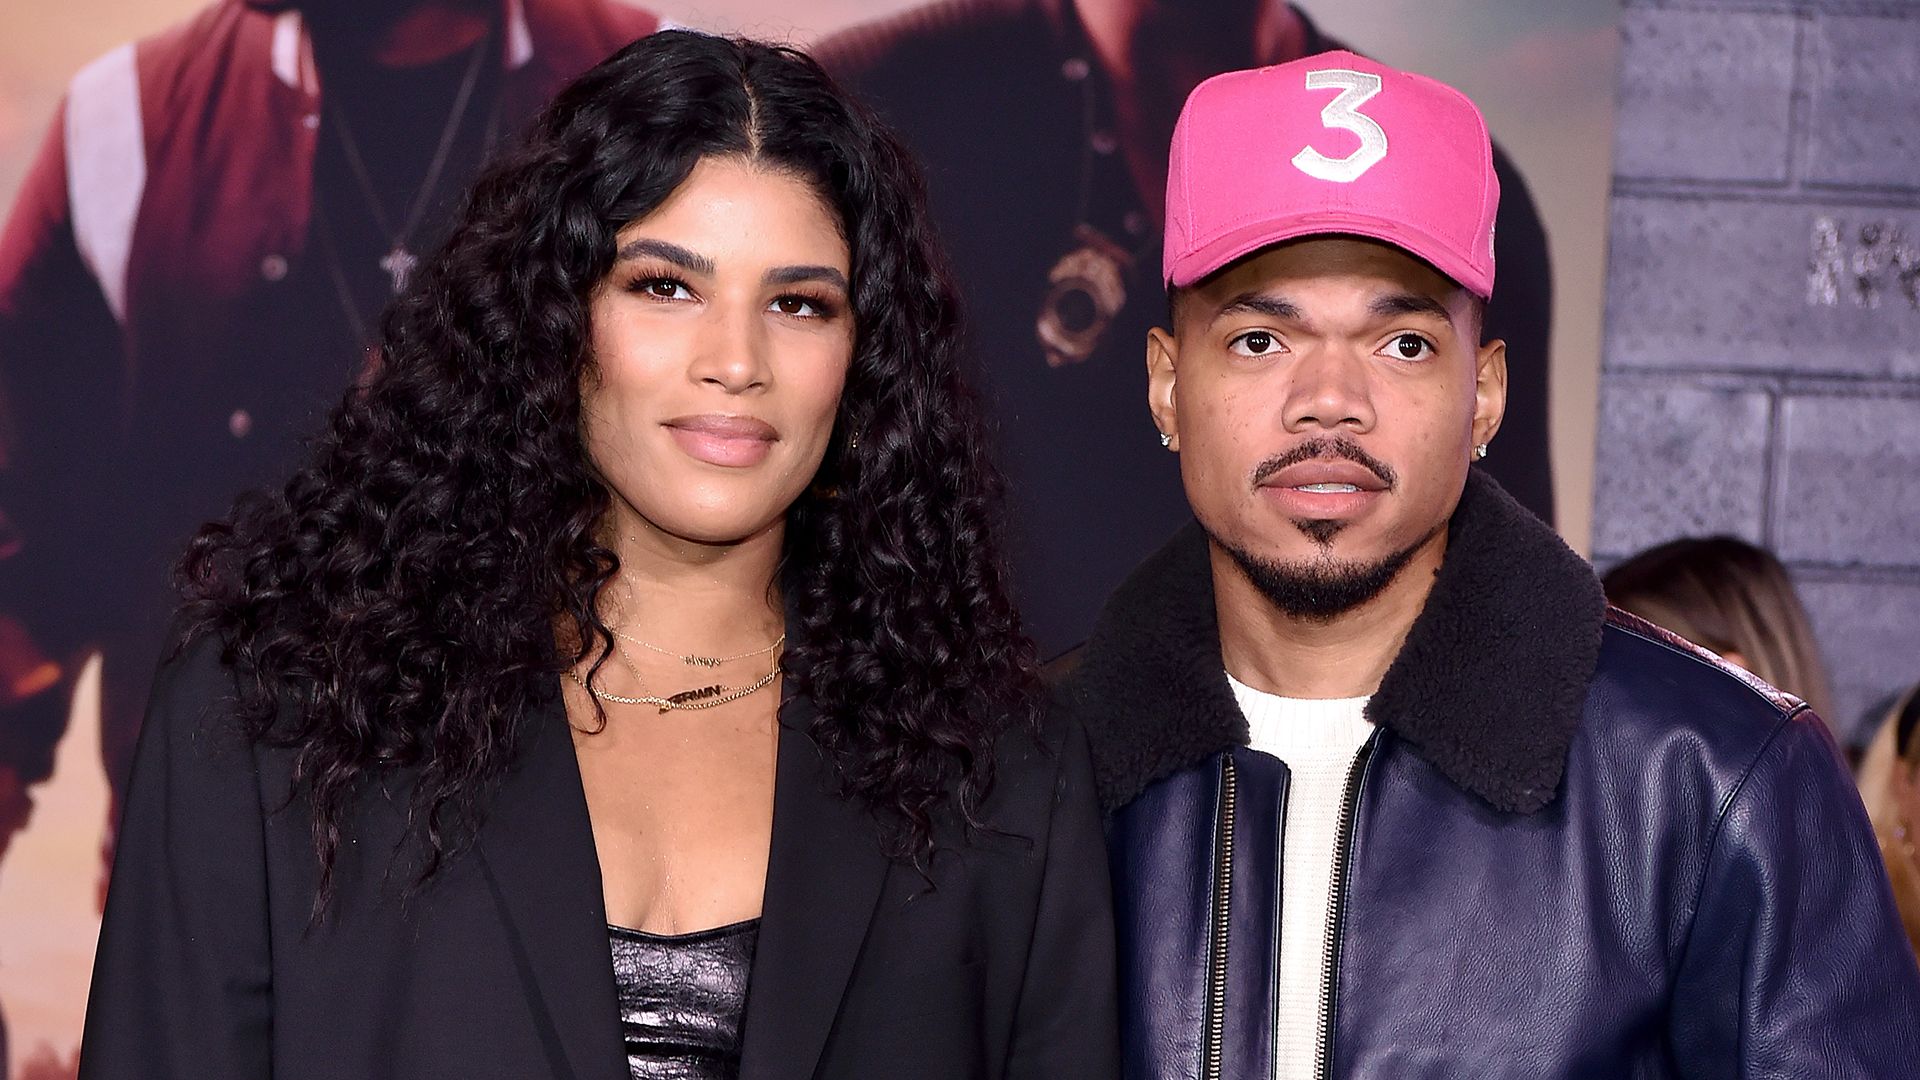 Chance the Rapper and Kirsten Corley attend the Premiere of Columbia Pictures' "Bad Boys for Life" 